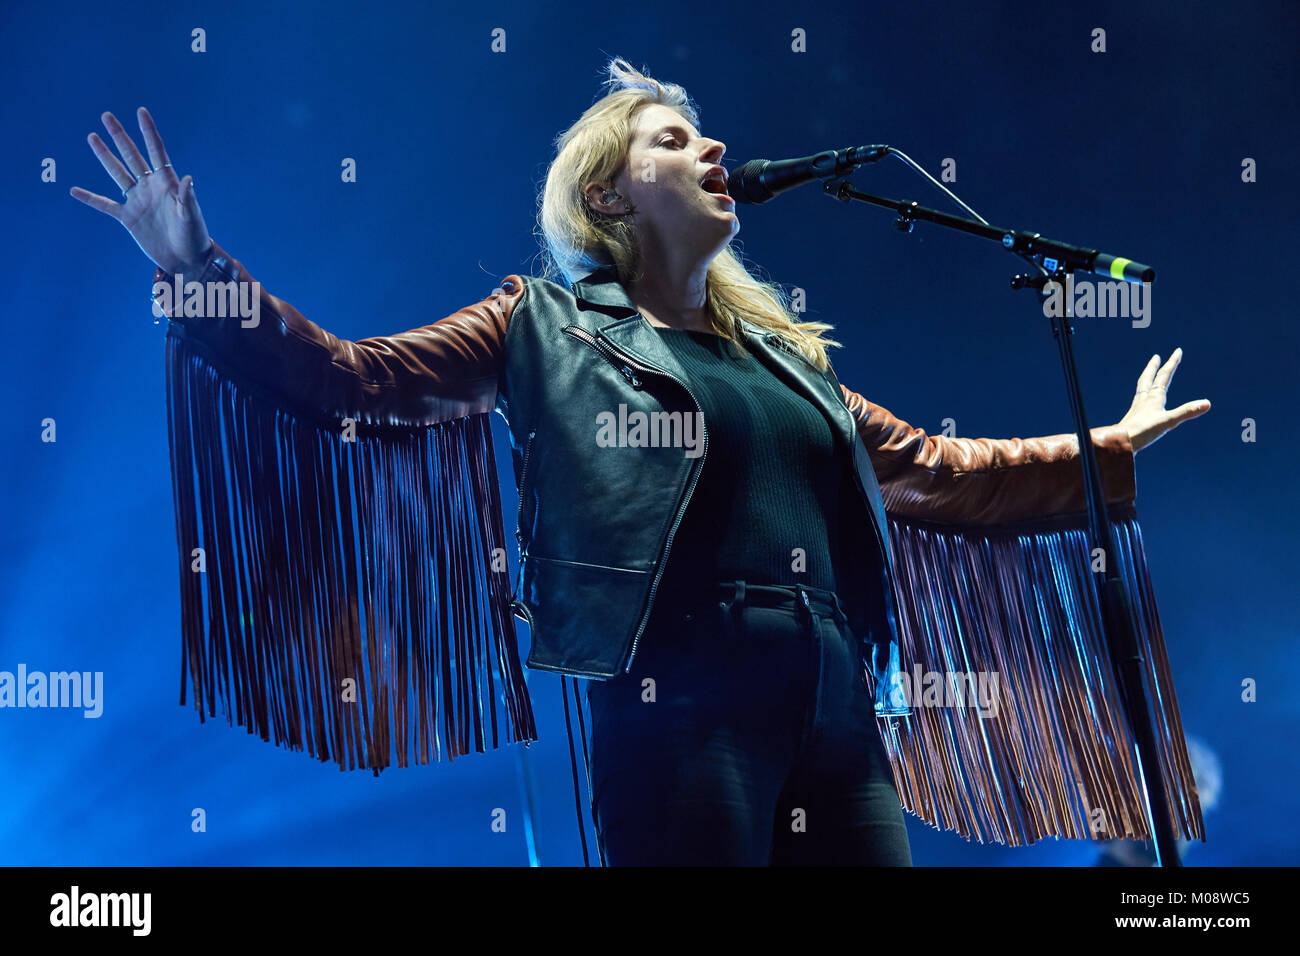 The Norwegian singer, songwriter and musician Susanne Sundfør performs a live concert at the Norwegian music festival Øyafestivalen 2015 in Oslo. Norway, 15/08 2015. Stock Photo